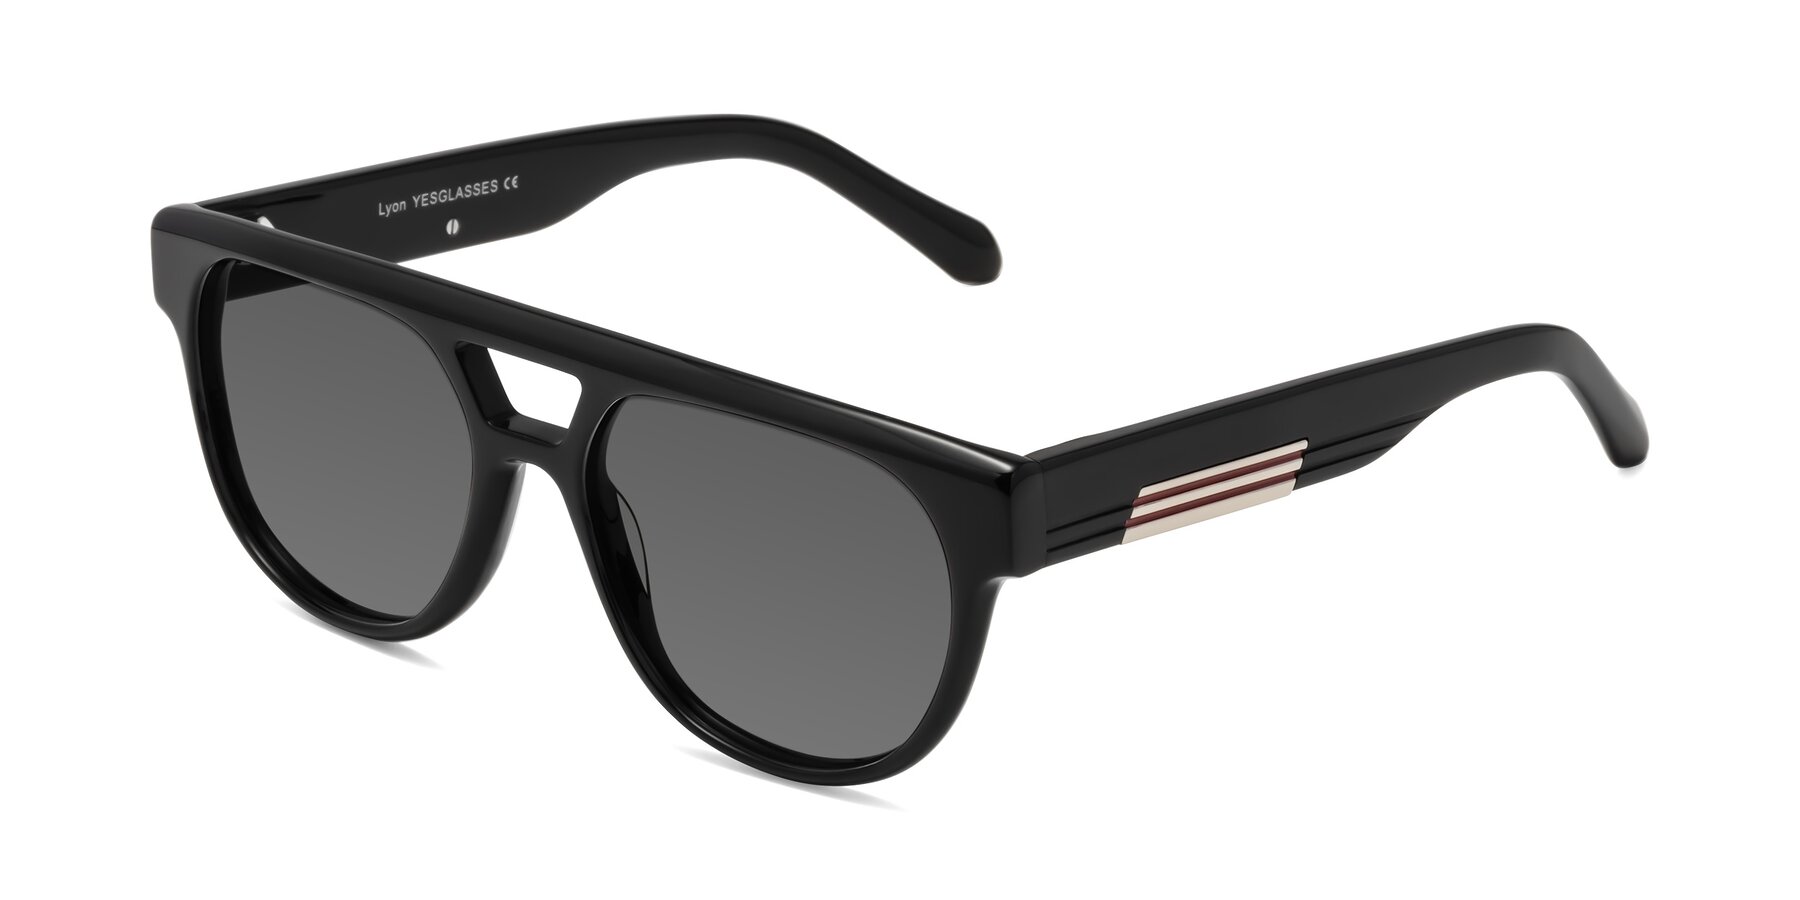 Angle of Lyon in Black with Medium Gray Tinted Lenses